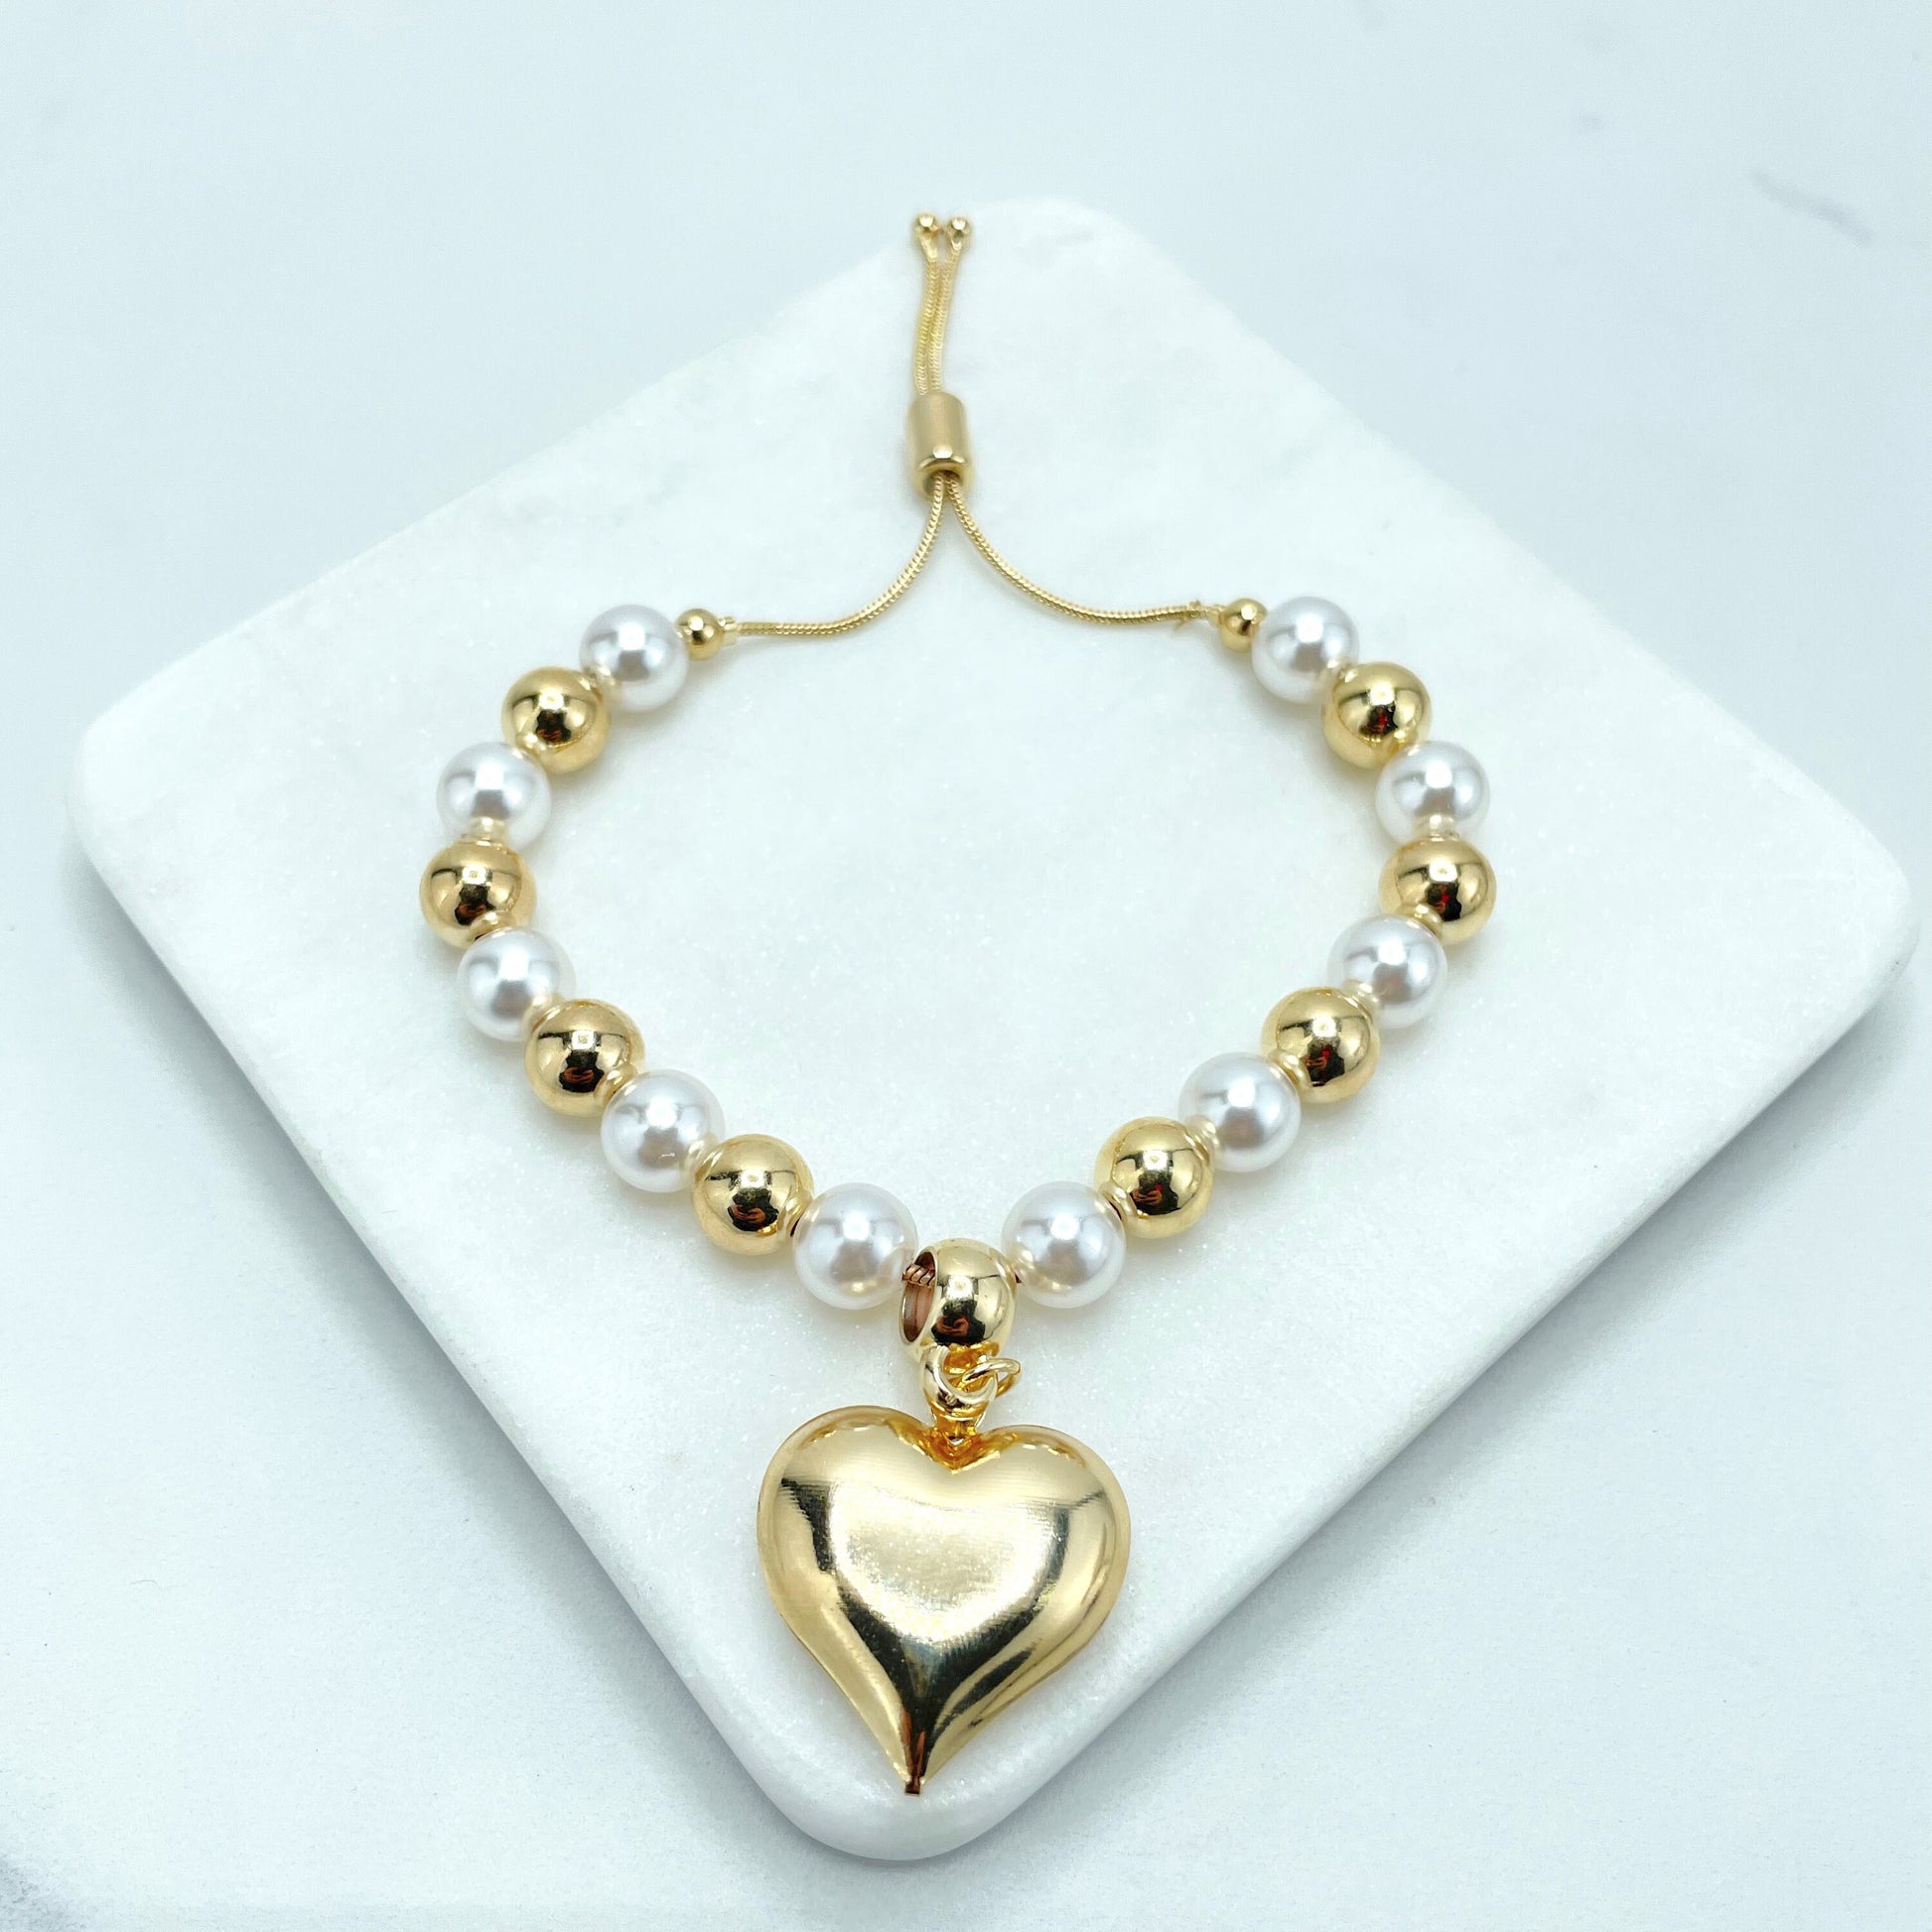 18k Gold Filled 1mm Box Chain with Gold Beads & Simulated Pearls, Heart Charm, Adjustable Beaded Bracelet, Wholesale Jewelry Making Supplies